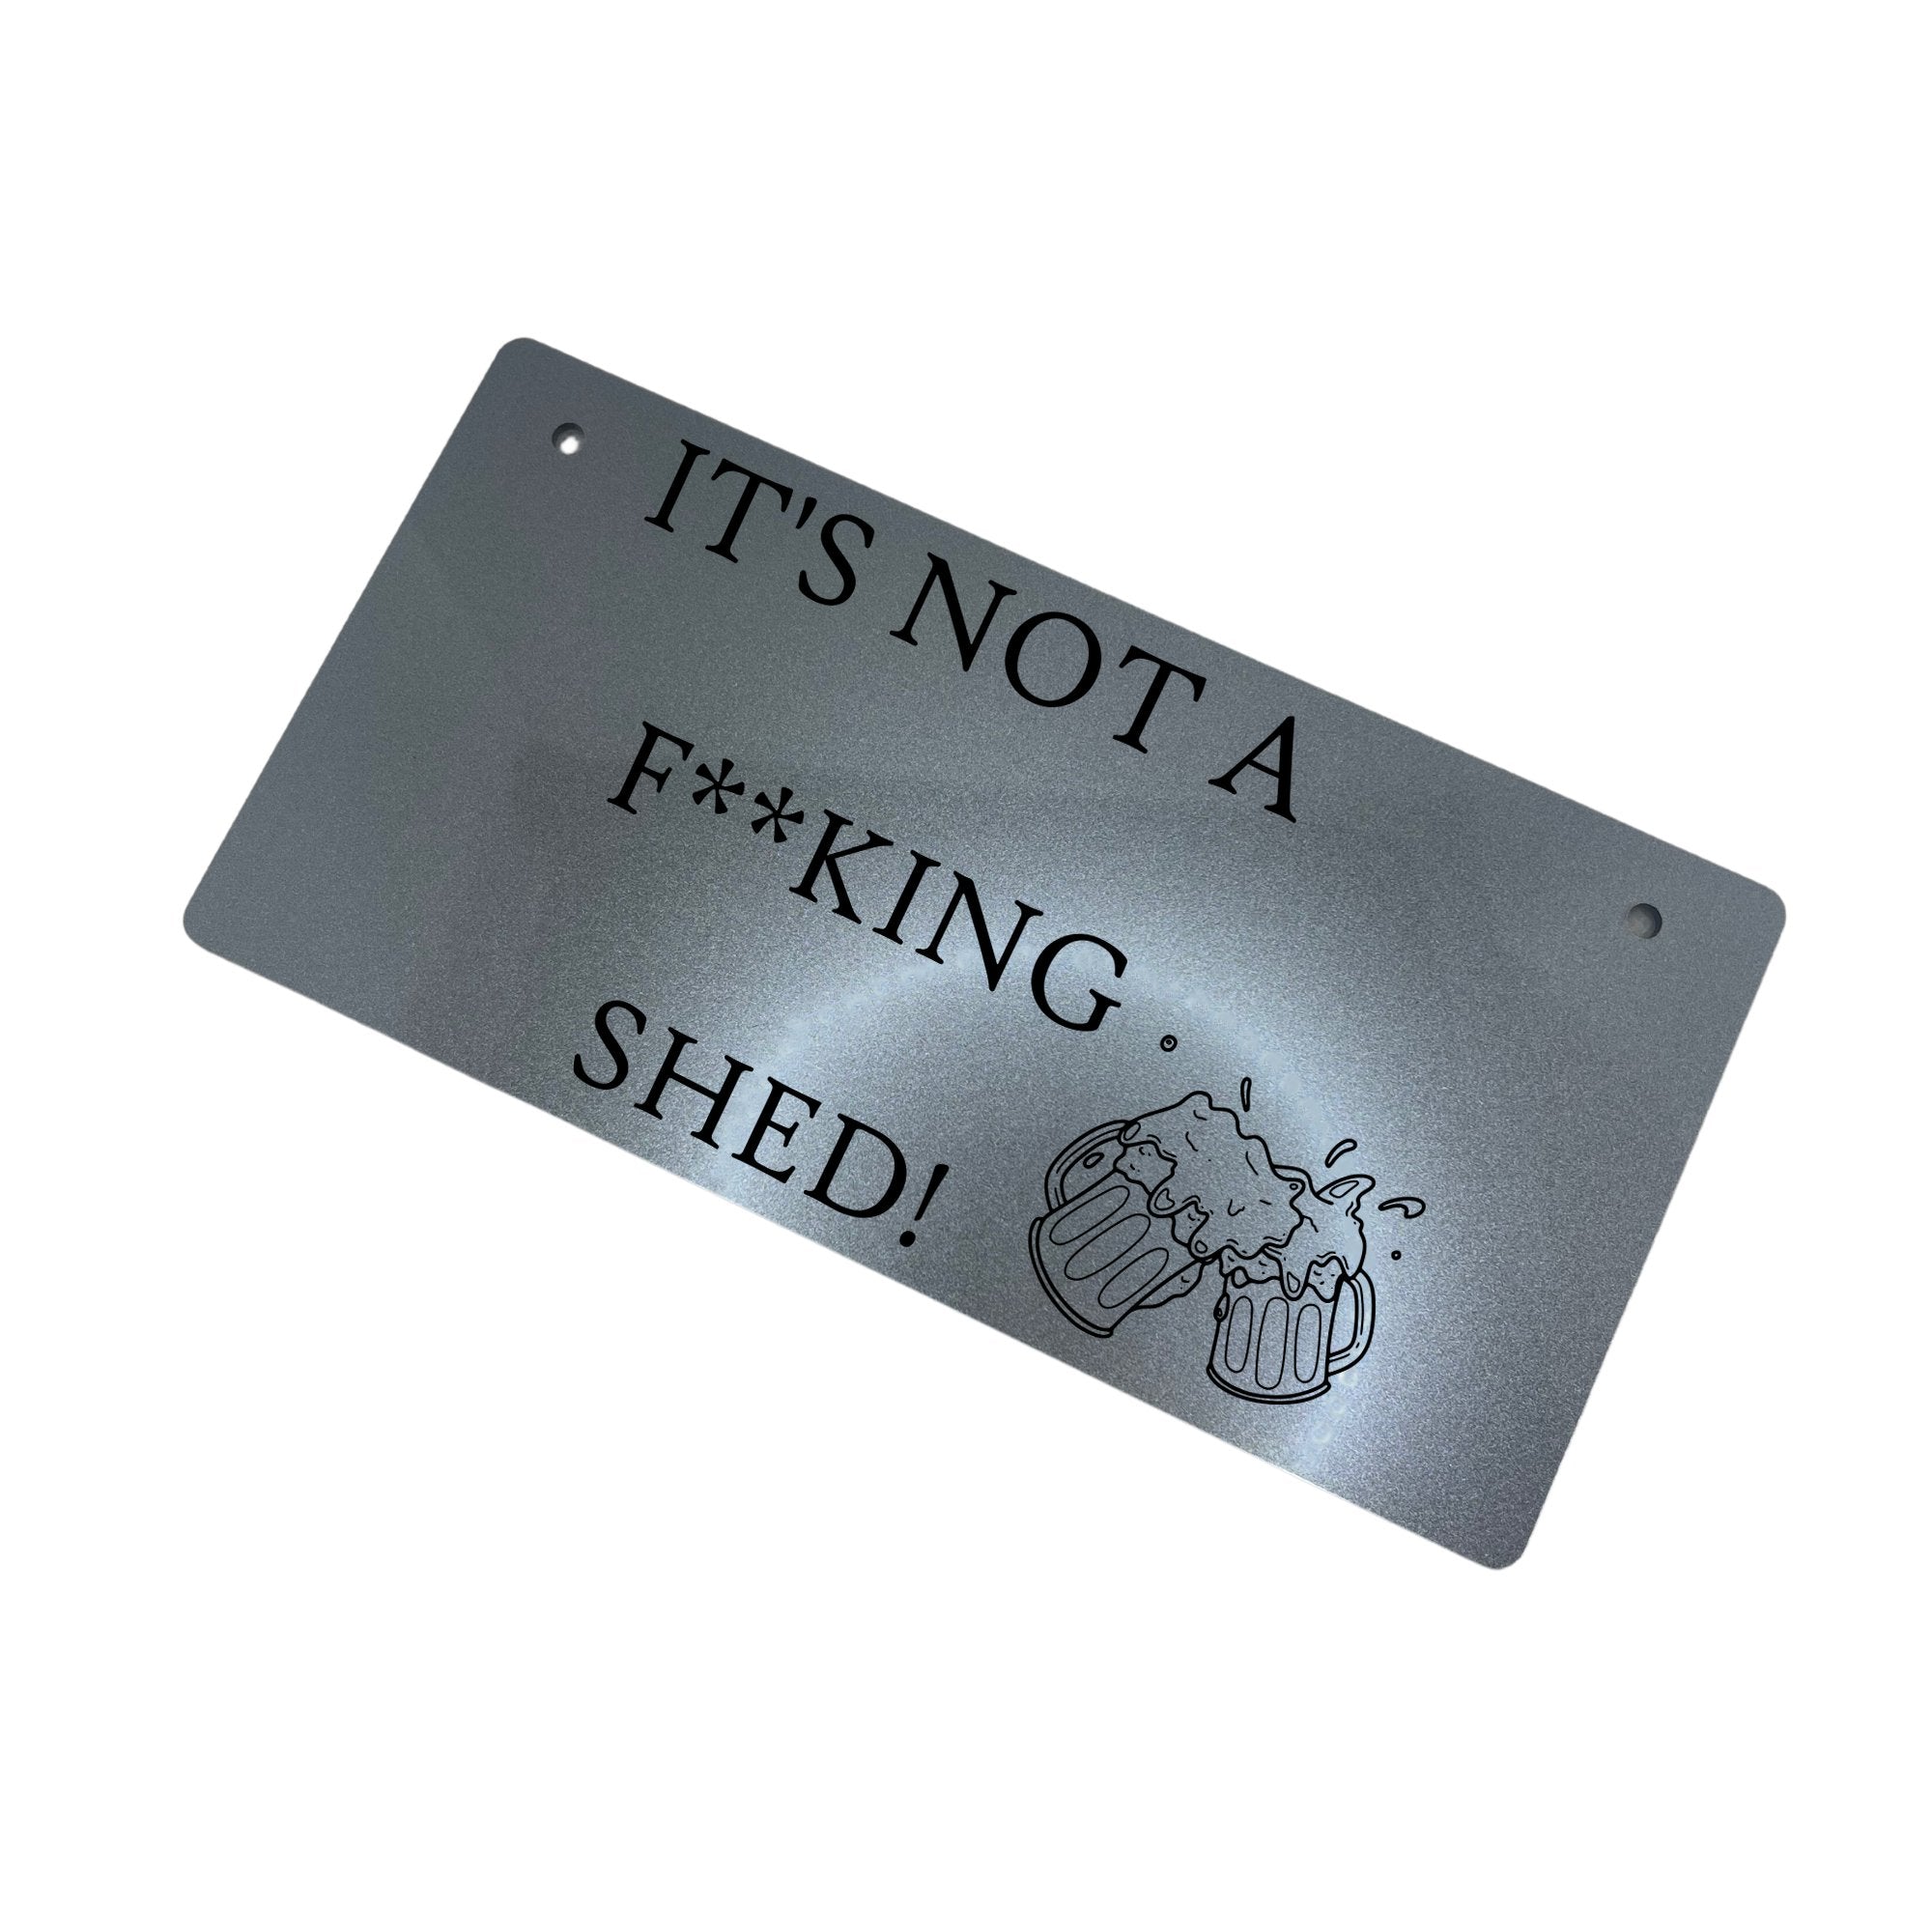 A high-quality acrylic sign with engraved beer glasses design, reading 'IT'S NOT A F**KING SHED', in a choice of elegant gold or sleek silver.